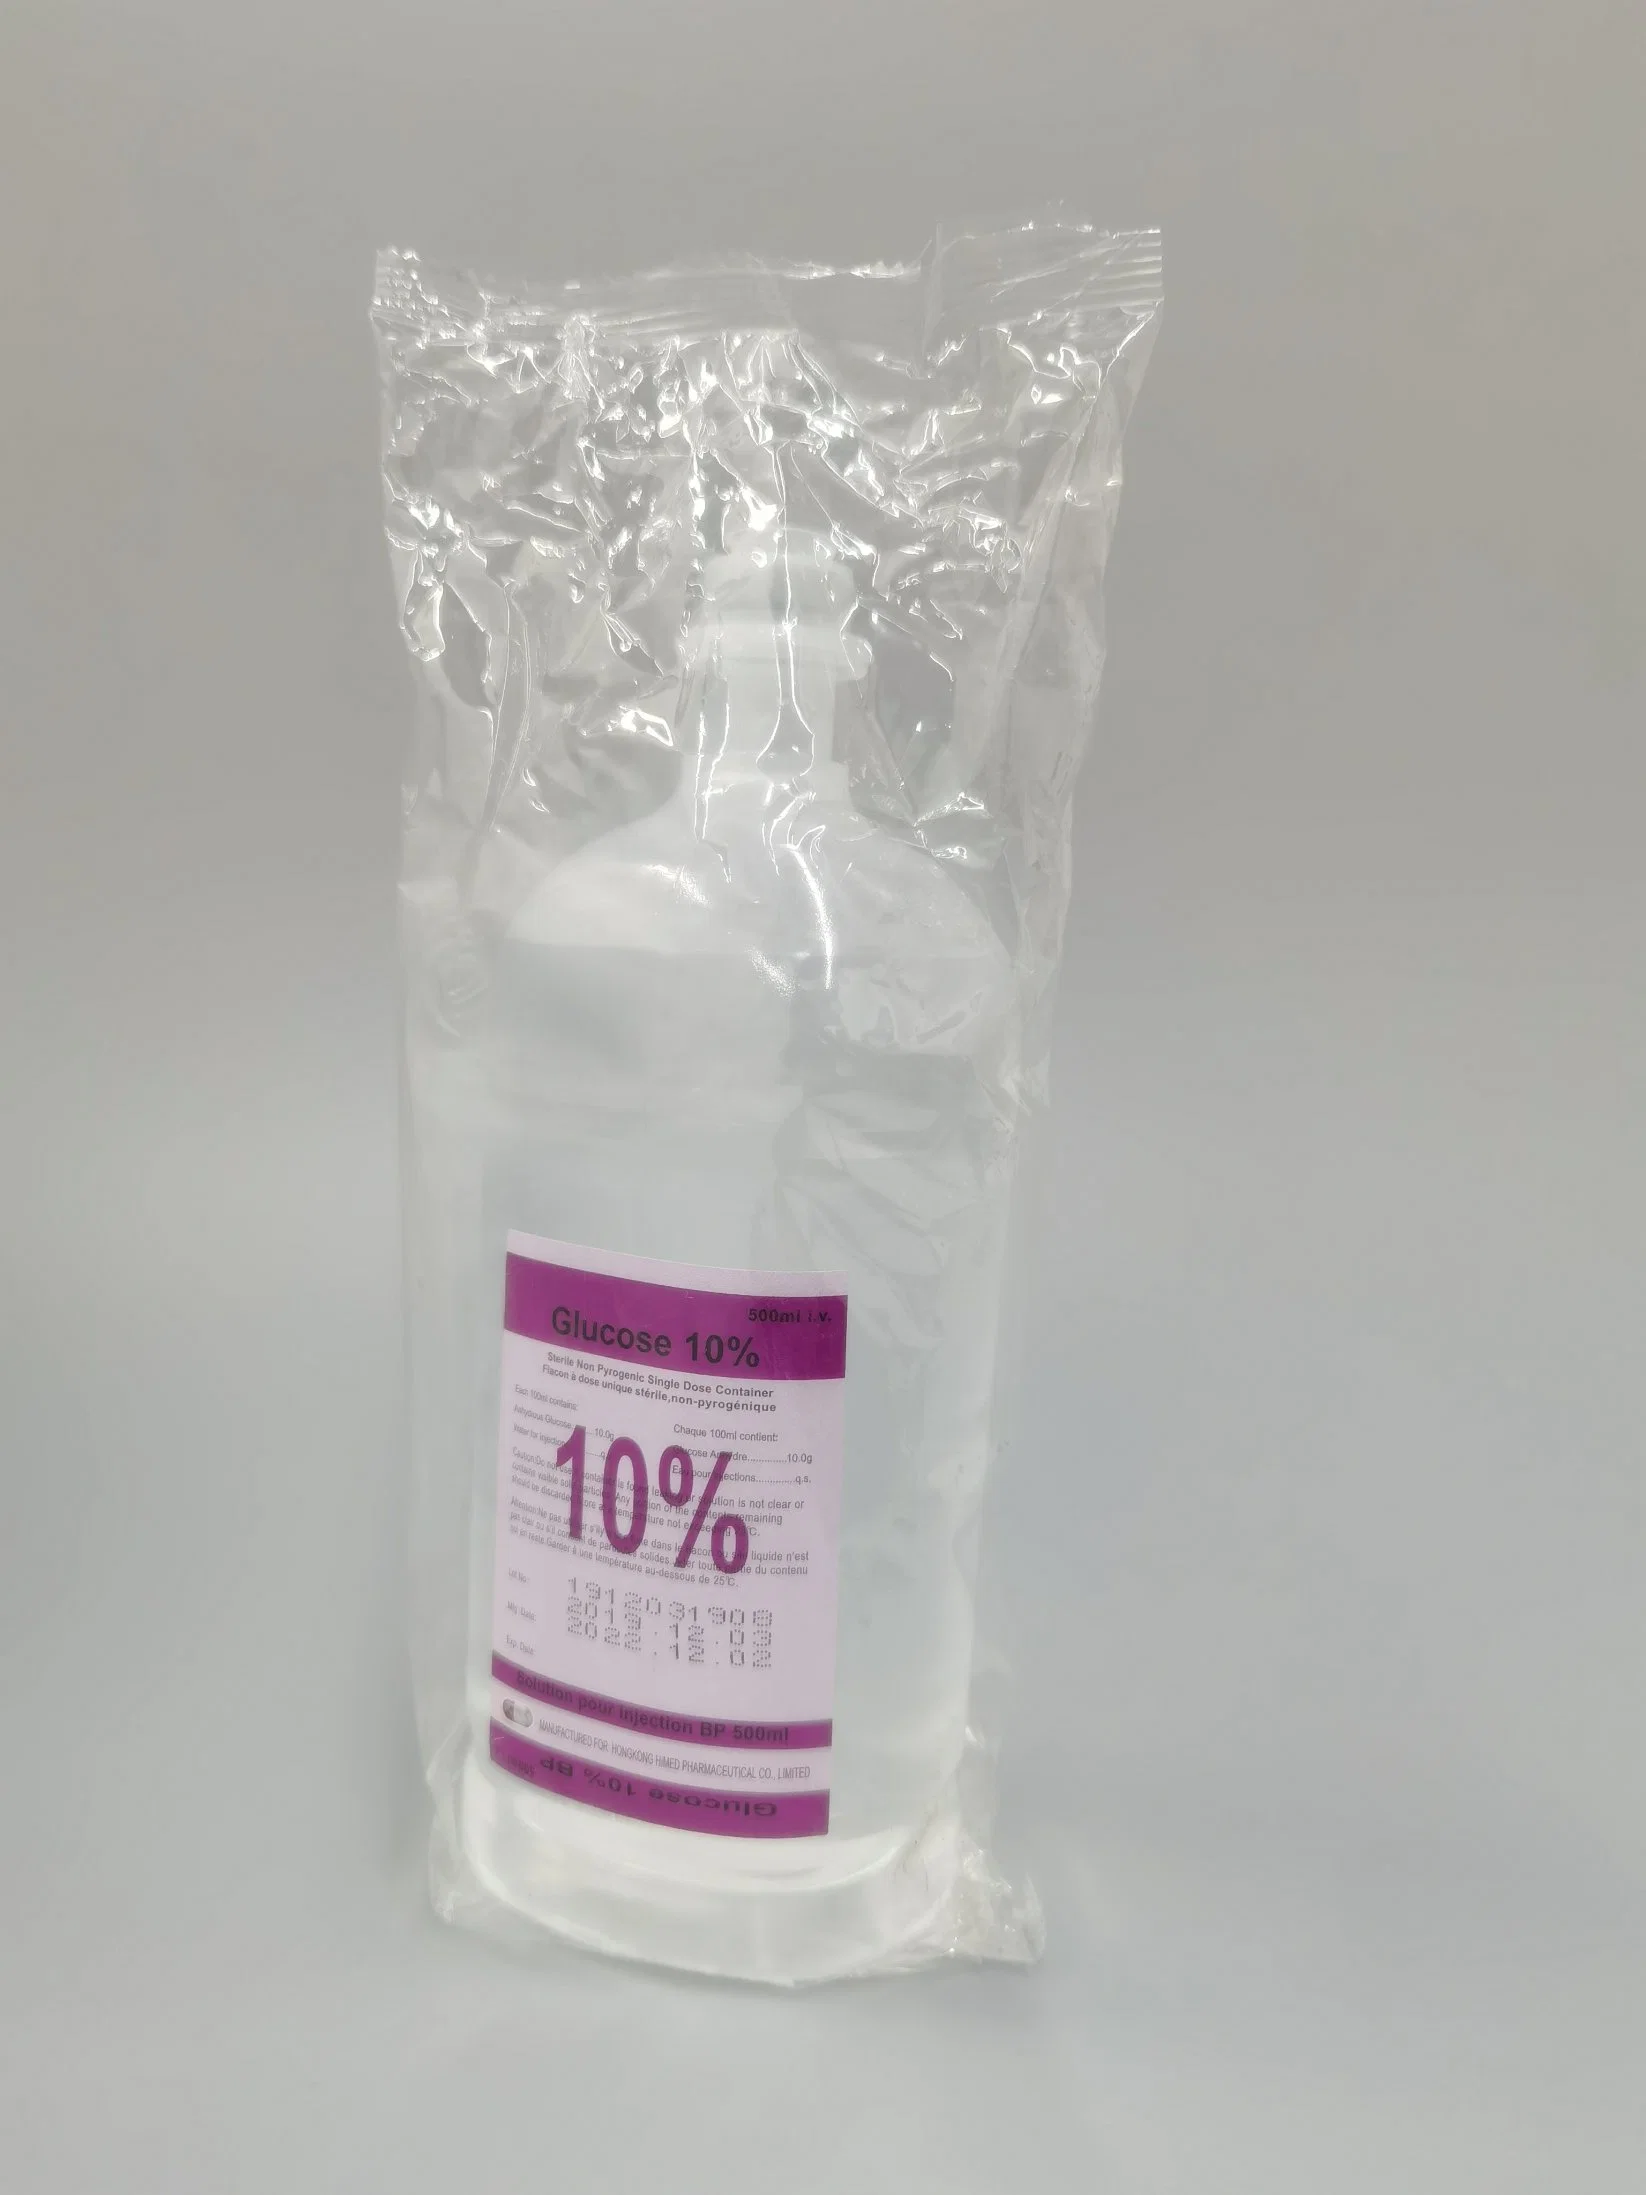 GMP Sodium Chloride/Normal Saline 0.9% Injection Western Medicine Drugs